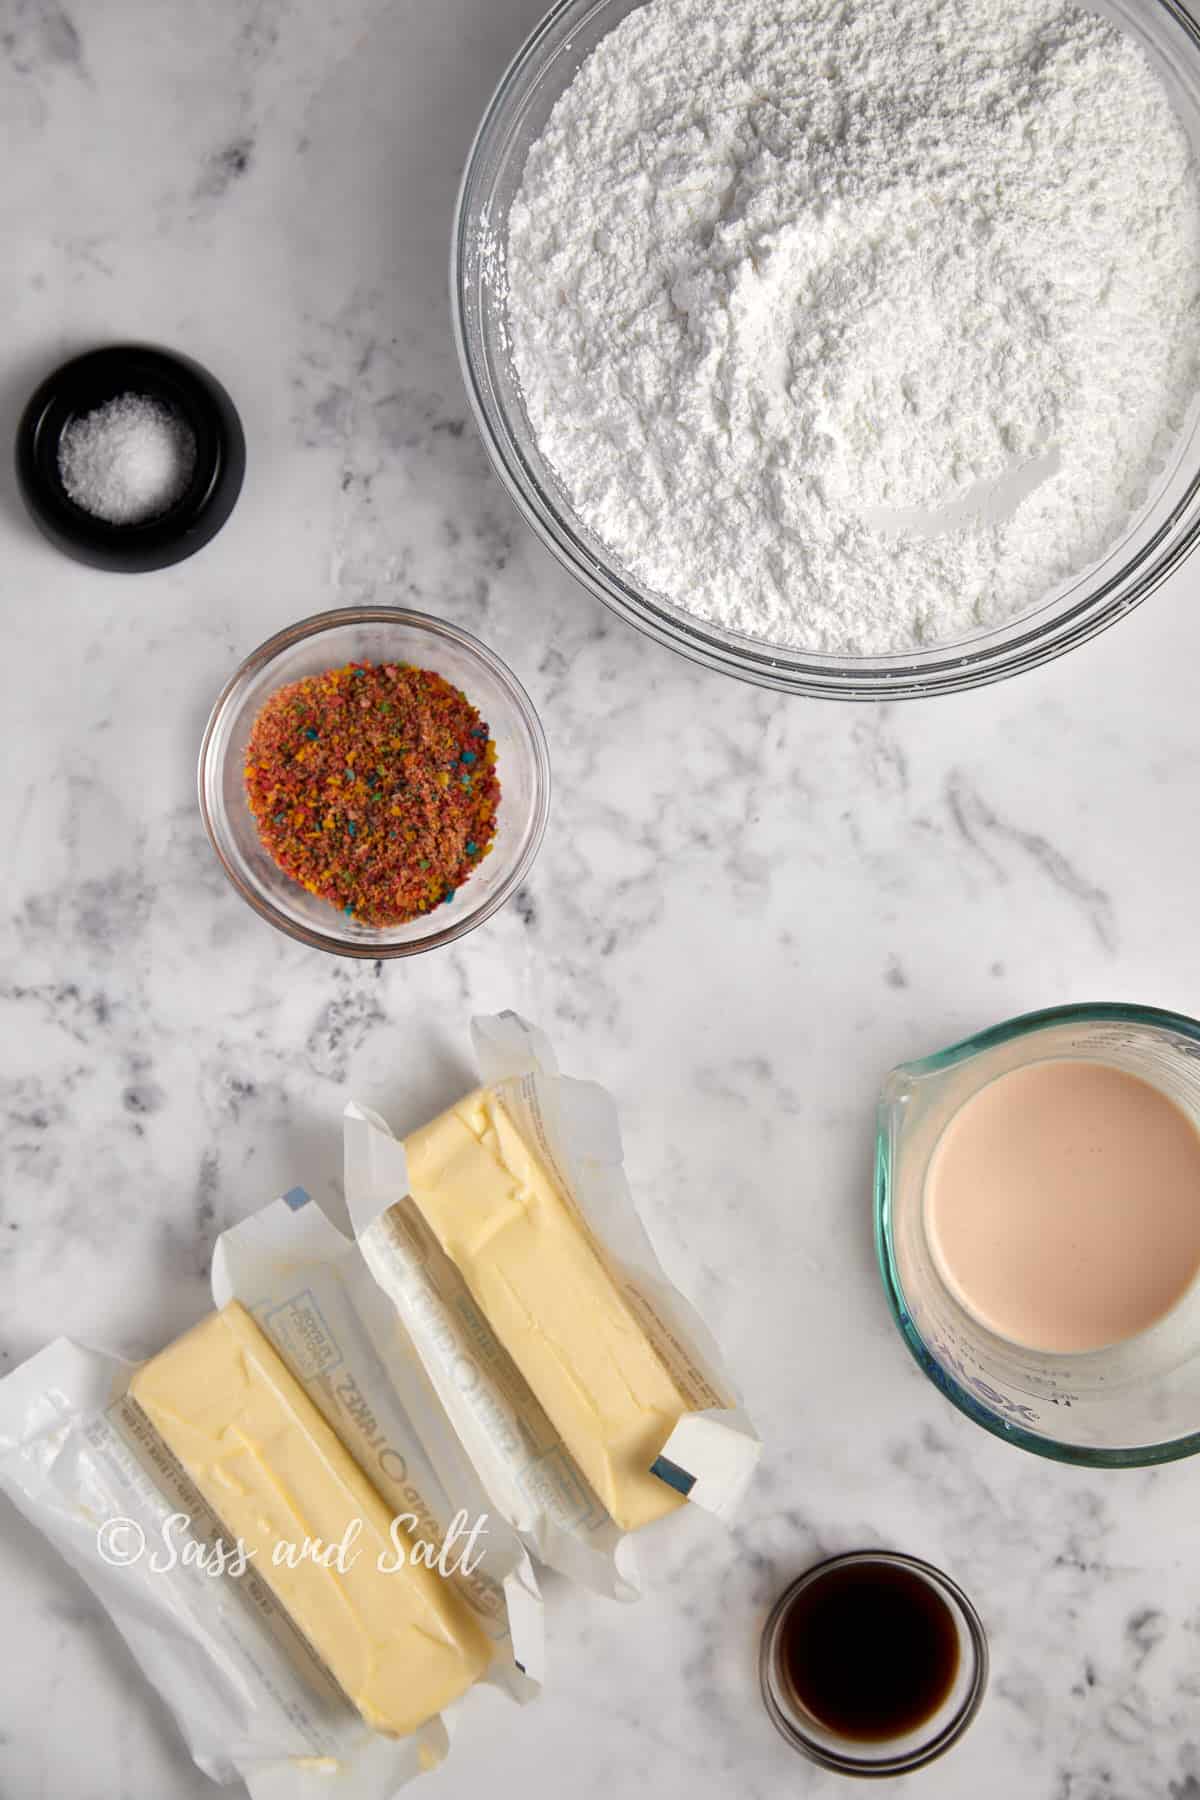 Ingredients for baking arranged on a marble countertop, including flour, seasoning, butter, milk, and vanilla extract, ready for a cooking recipe.